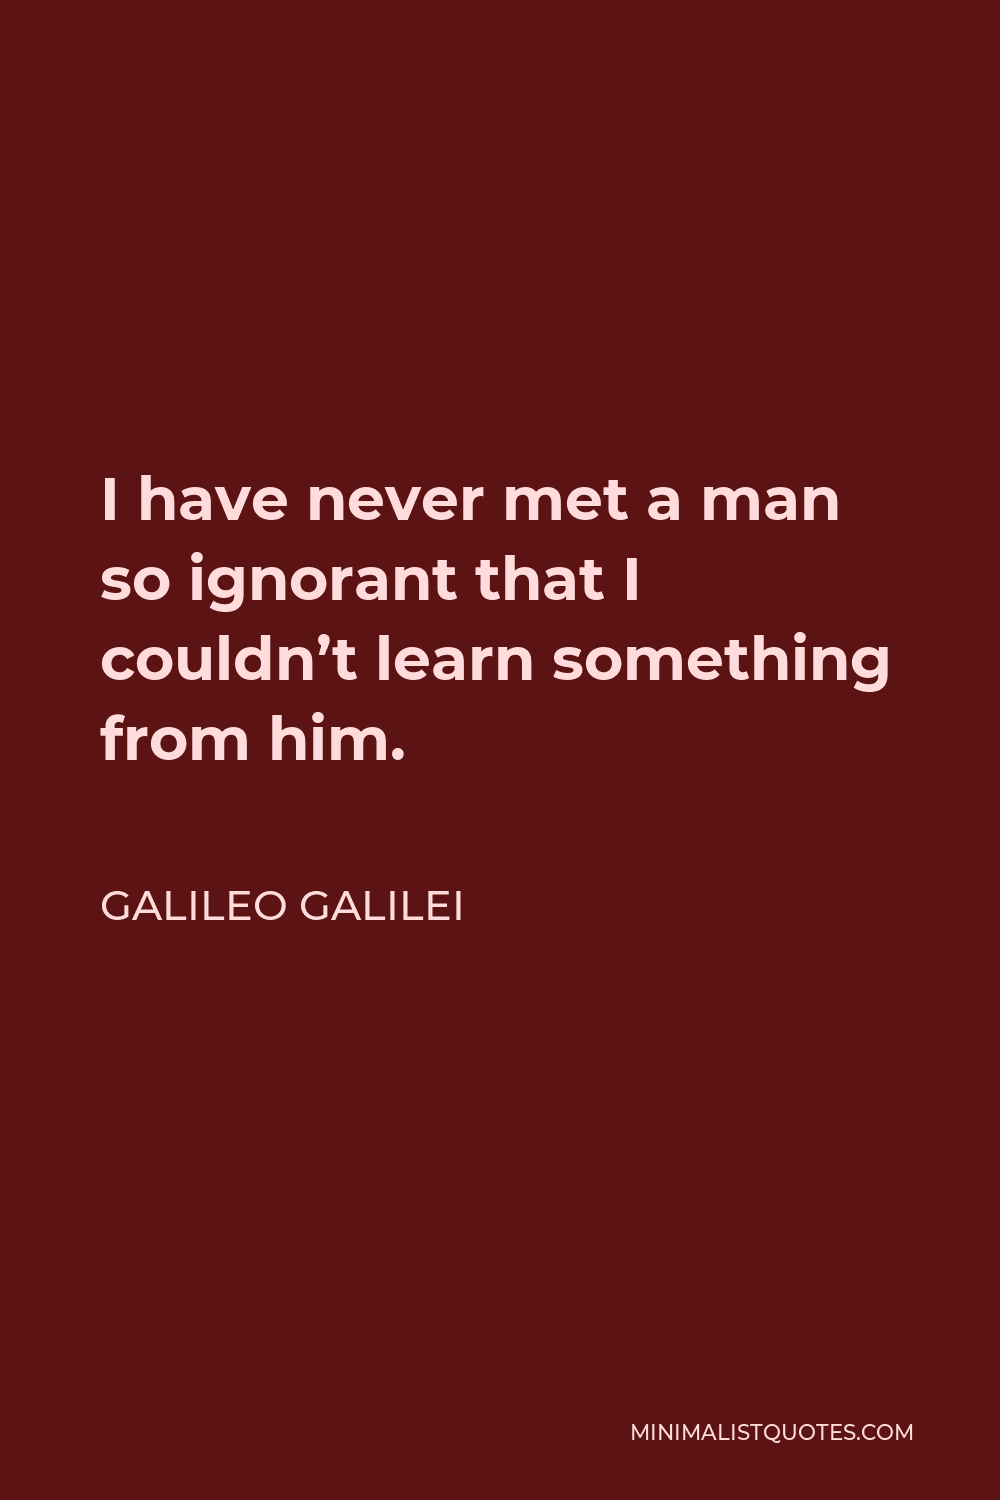 Galileo Galilei Quote - I have never met a man so ignorant that I couldn’t learn something from him.